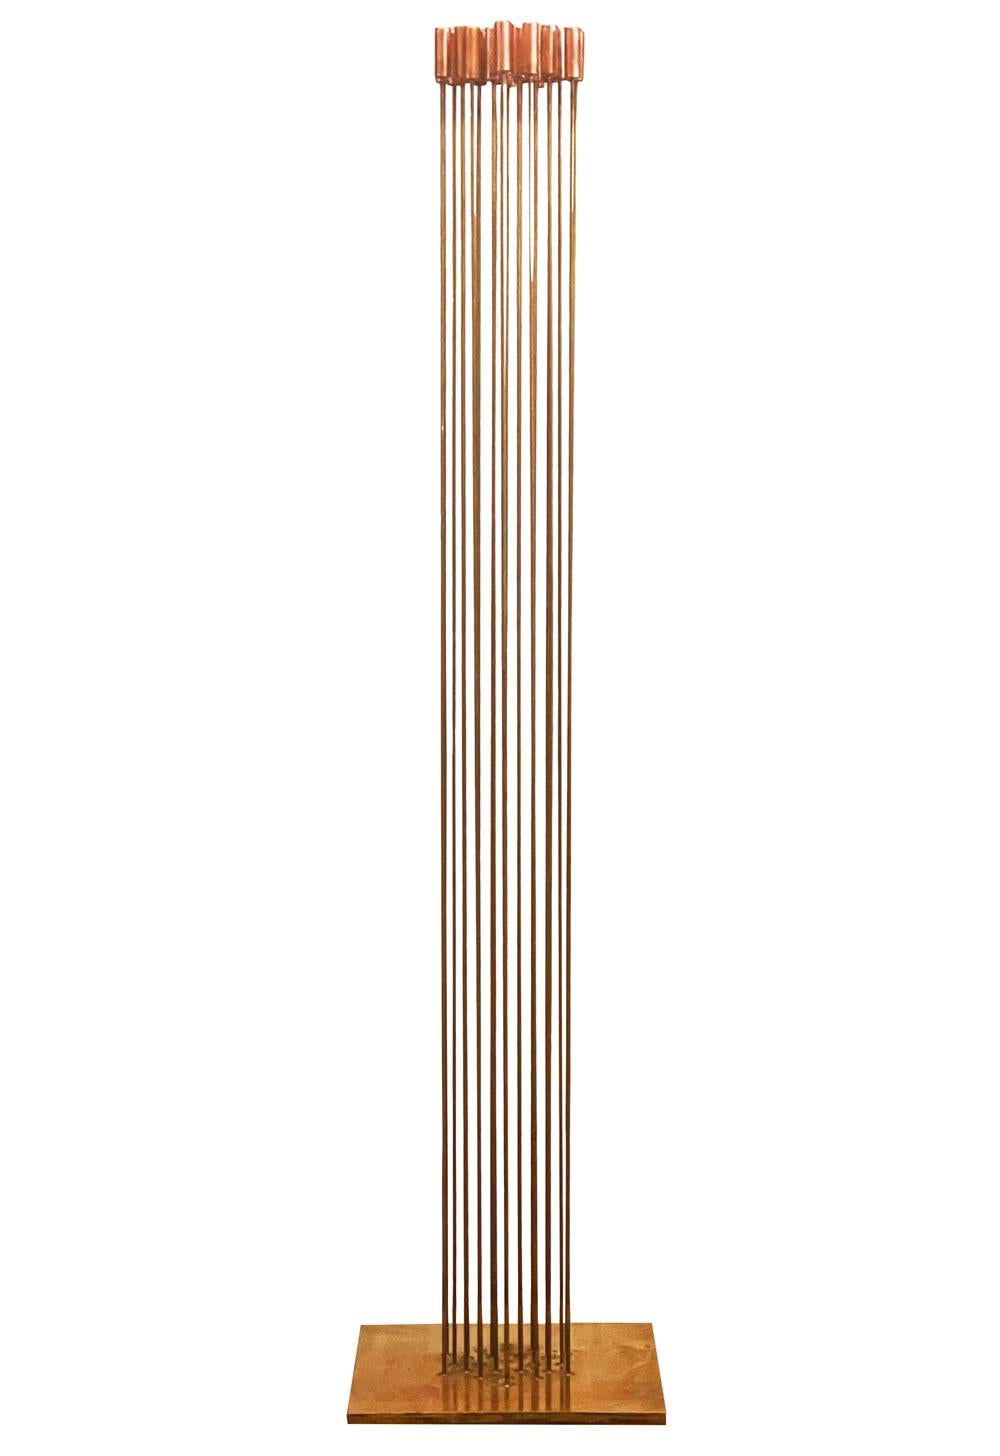 A stunning tall sound sculpture made by Val Bertoia. Makes a beautiful chime when played. Comprised of brass and beryllium copper. Stamped and numbered with COA from Bertoia Studio.